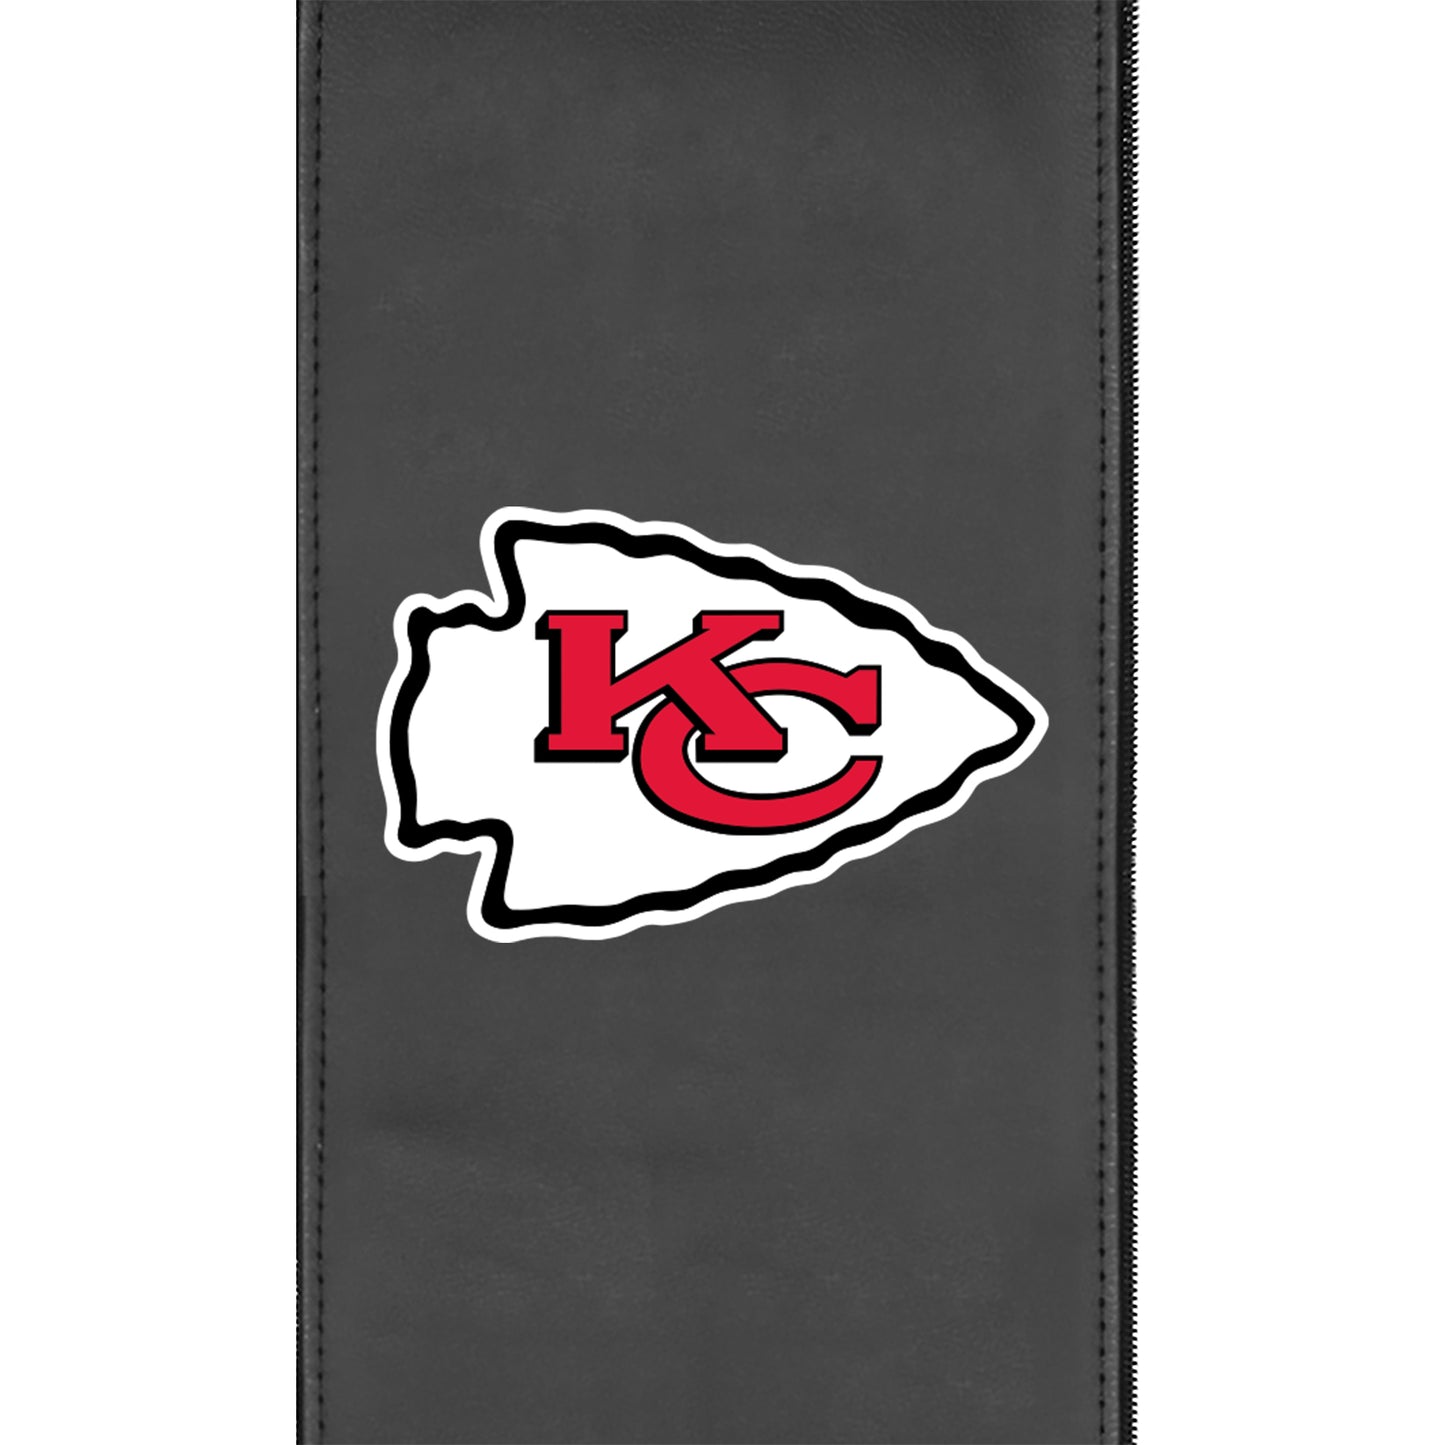 Xpression Pro Gaming Chair with  Kansas City Chiefs Primary Logo